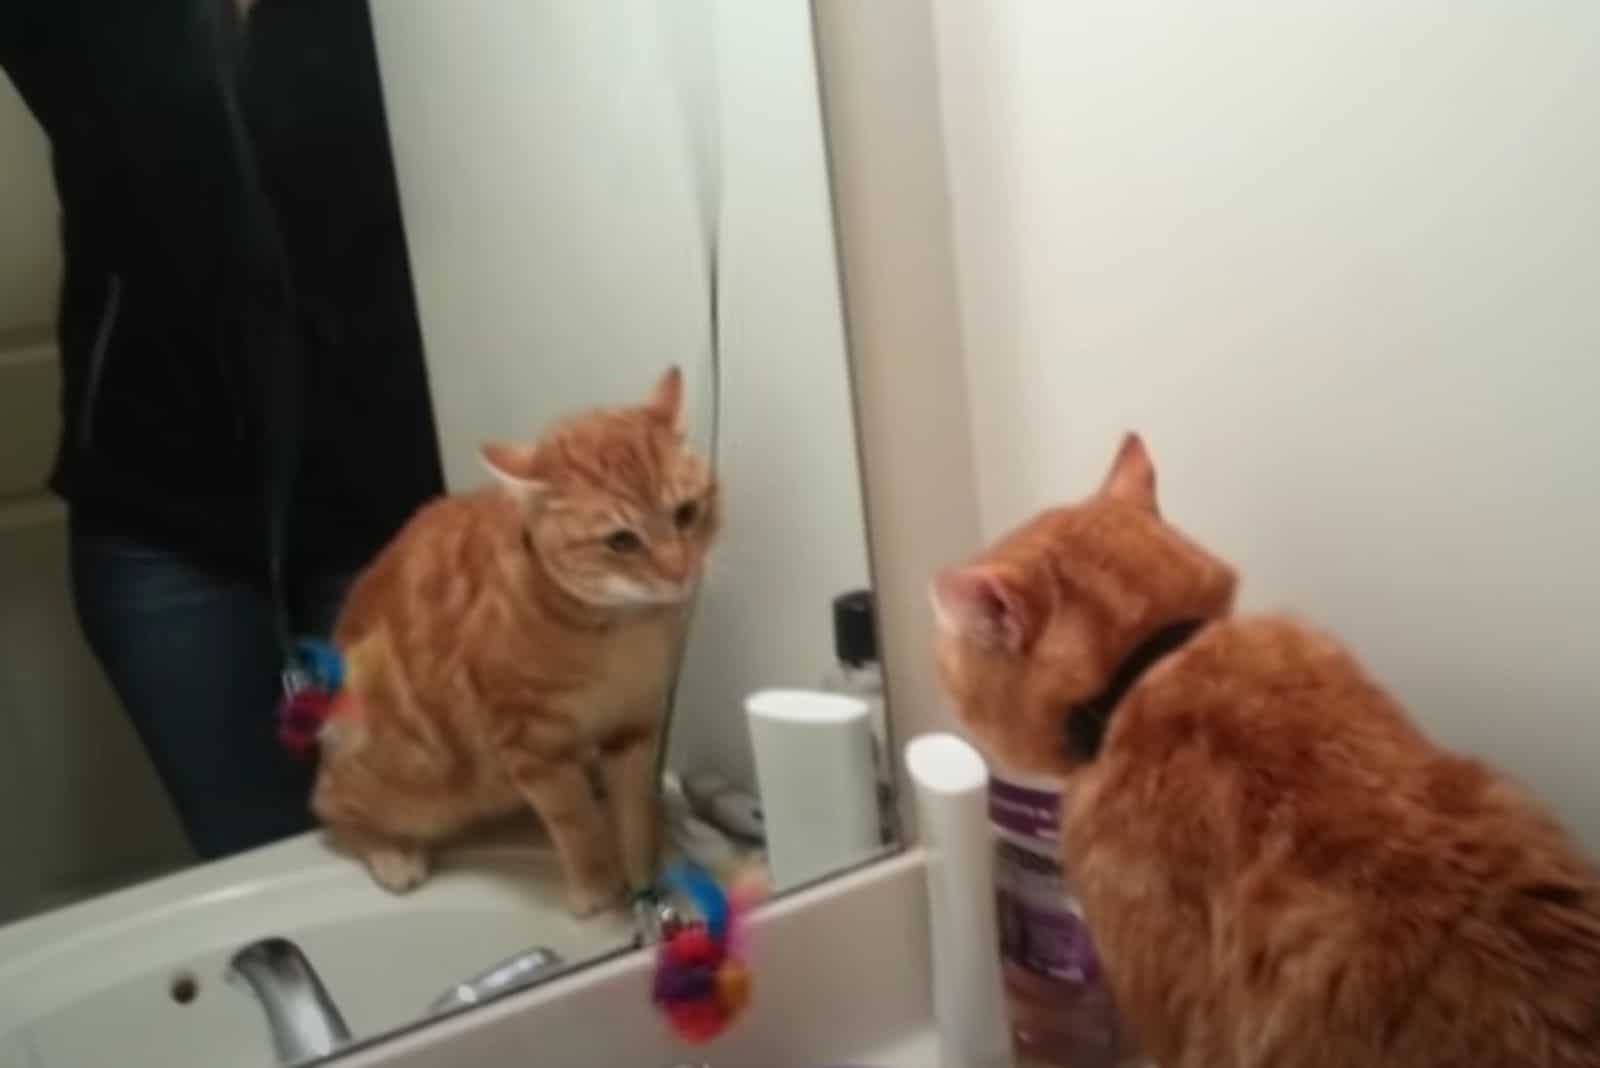 cat watching the mirror while owner stands back